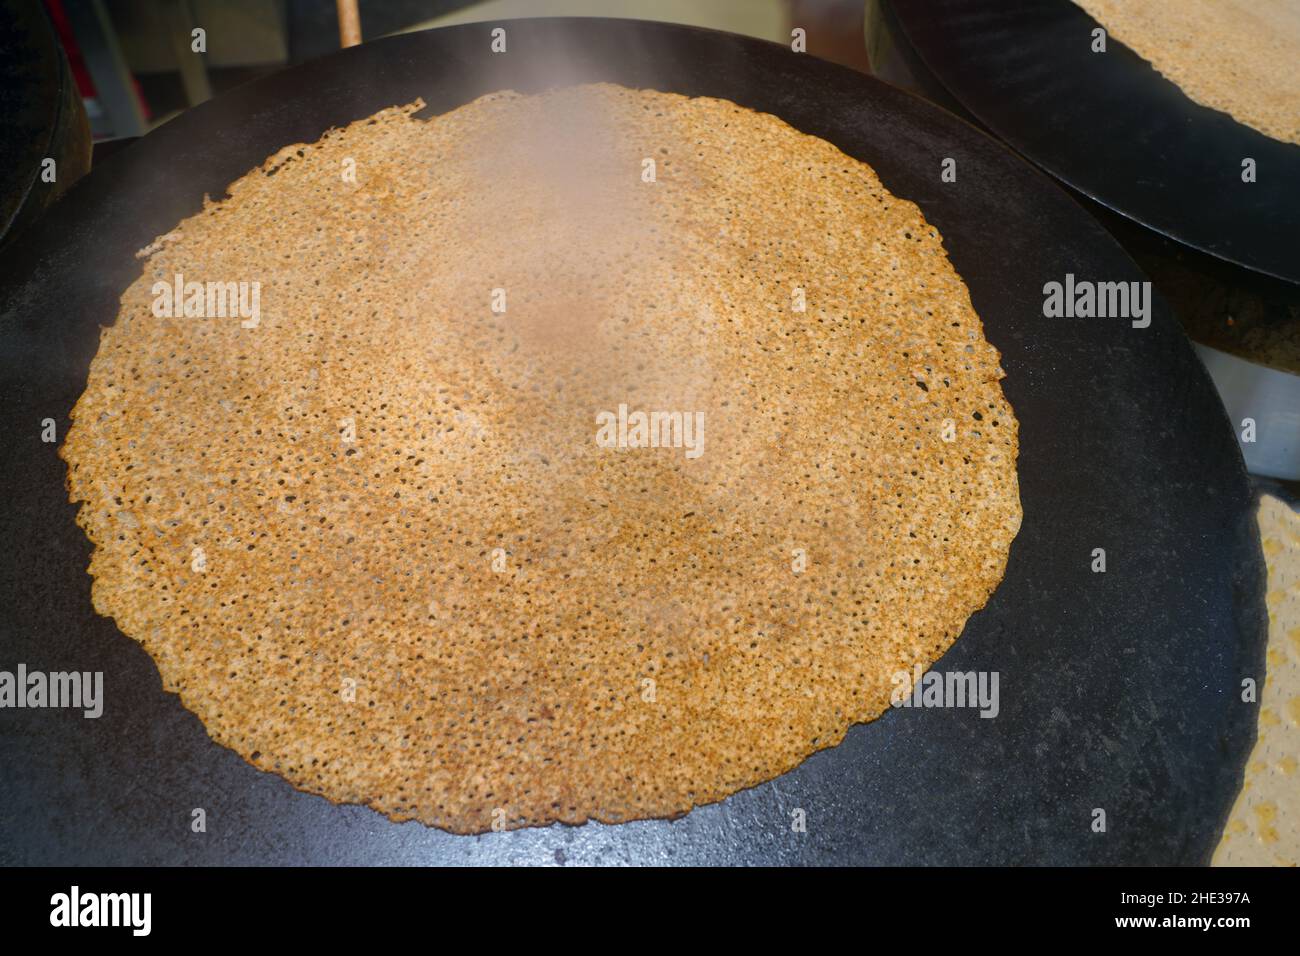 A buckwheat galette cooking on a traditional crepe griddle in Brittany, France Stock Photo